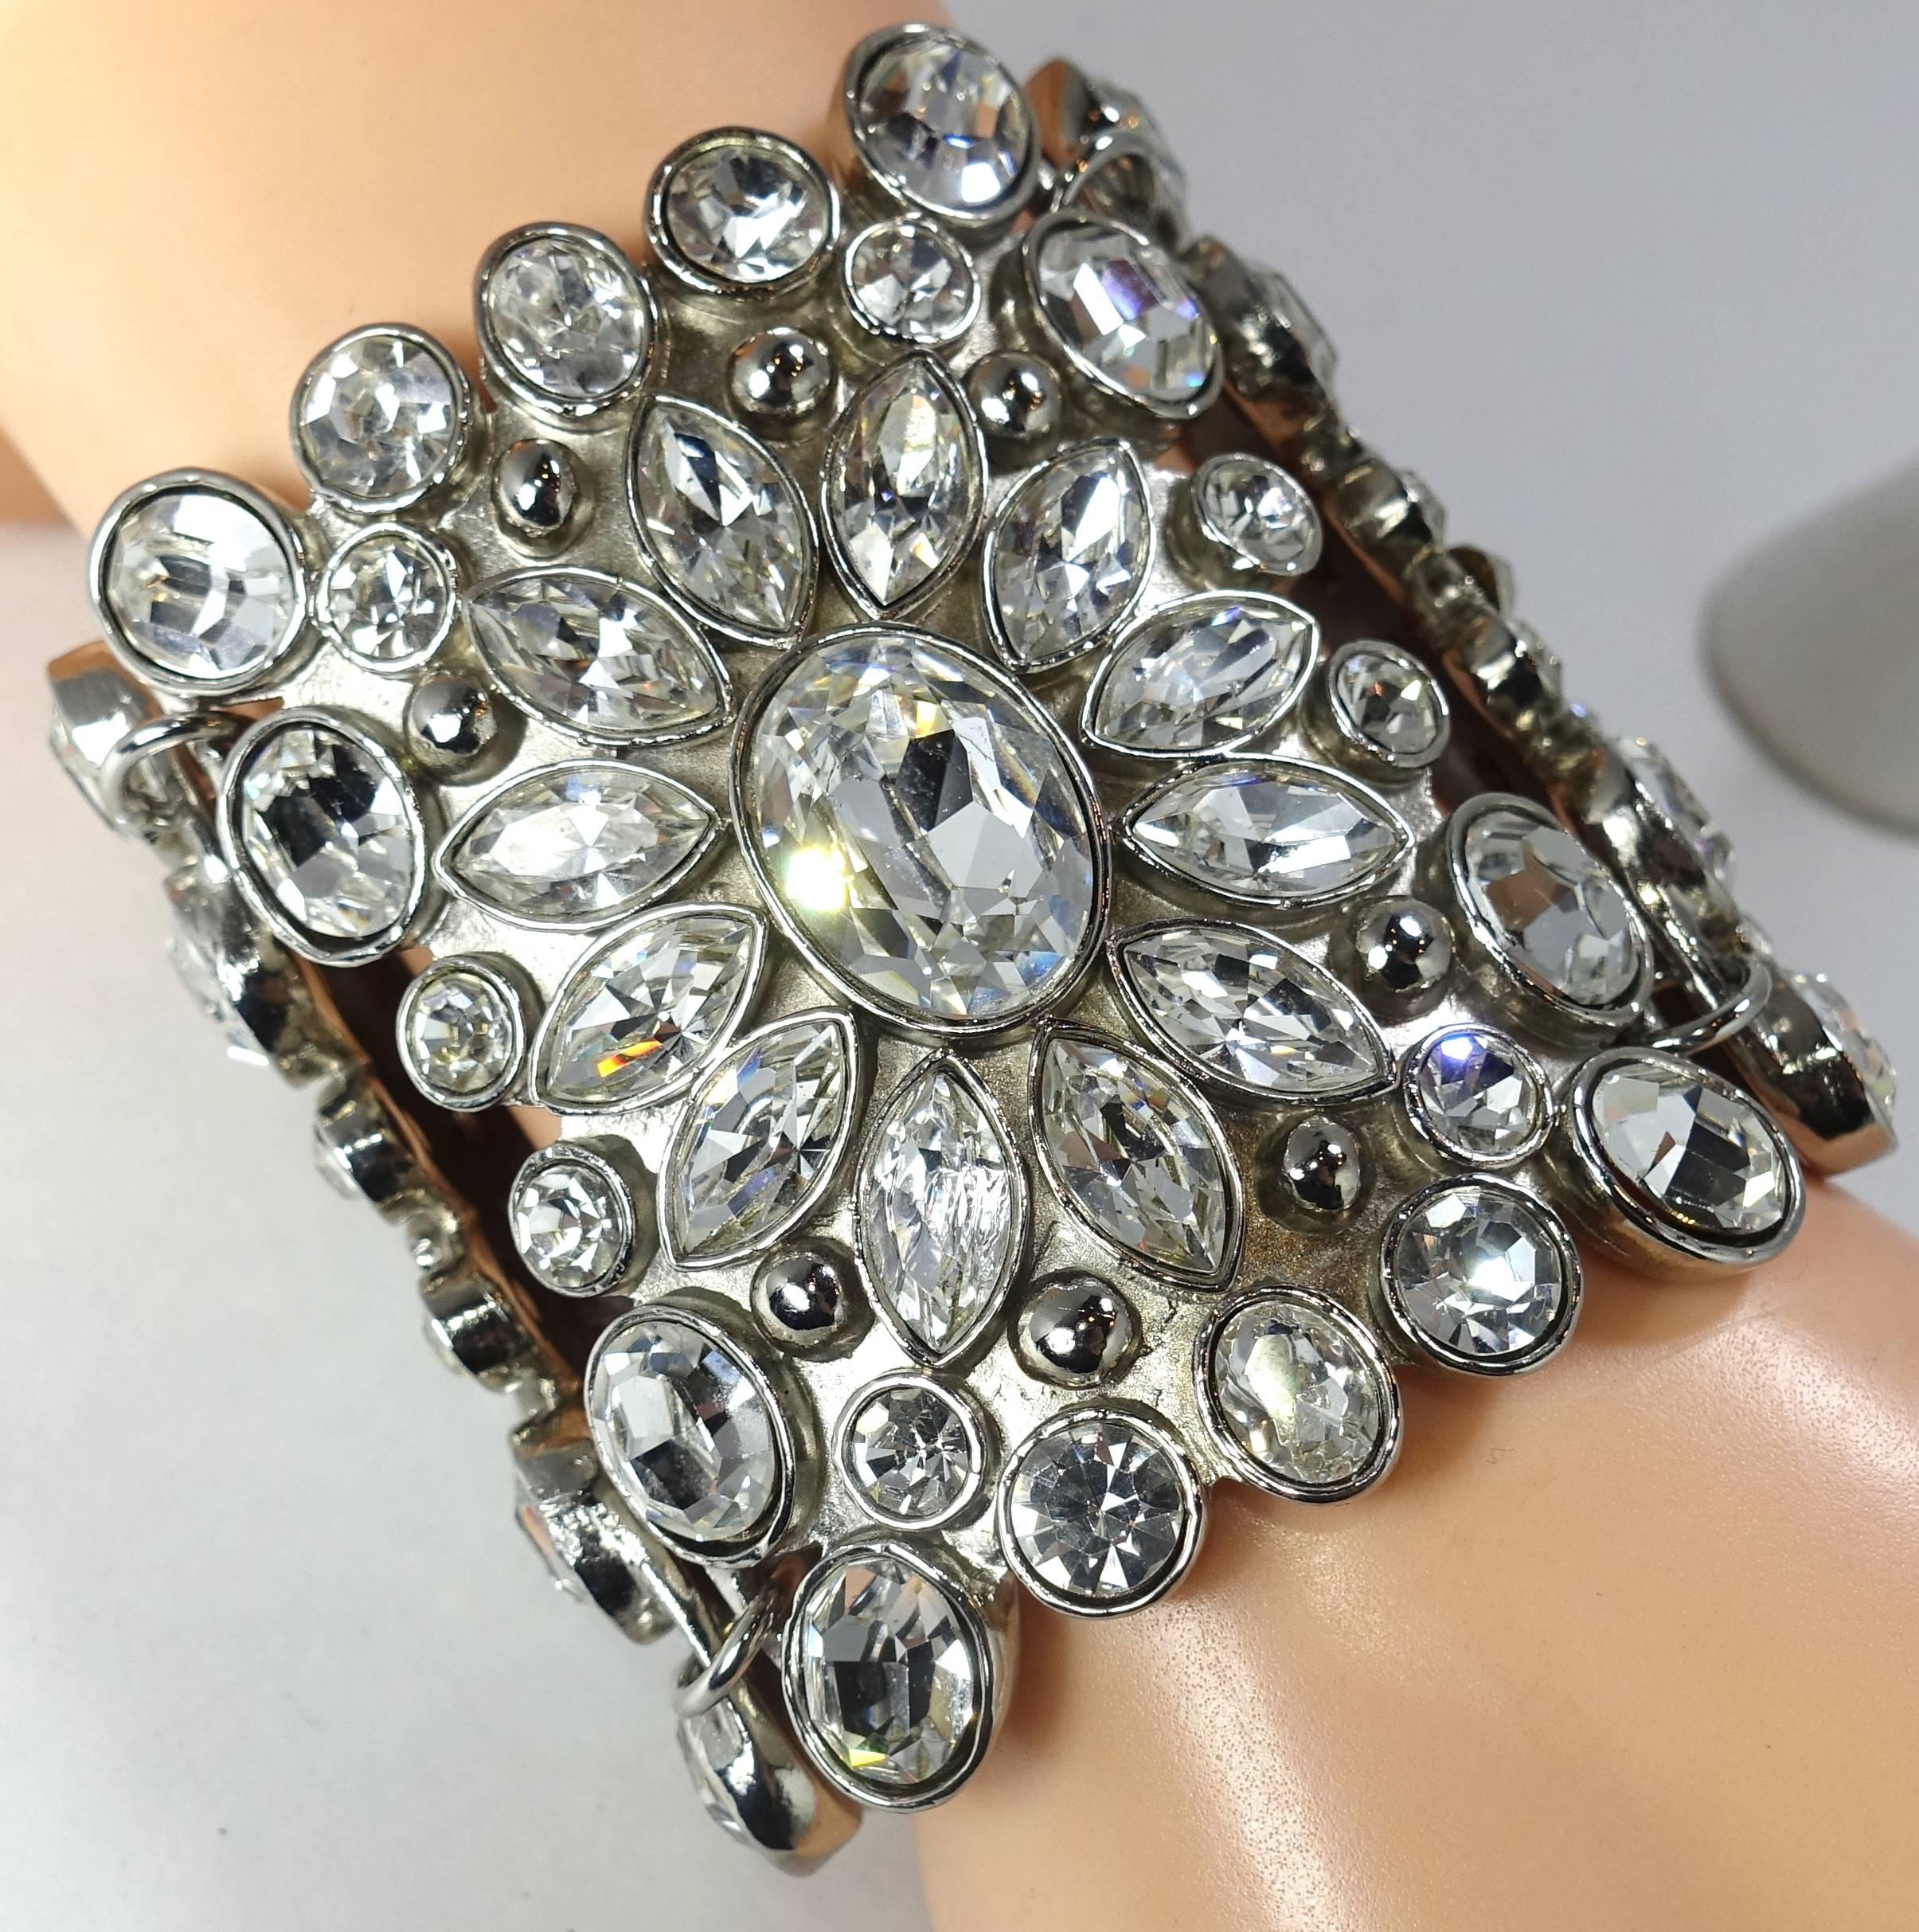 This bracelet by Kenneth Jay Lane is a prototype, which means this is the only one. It is certainly an eye catcher on the wrist.  It is made in 3 large sections with a huge oval crystal in the center of each section.  They are surrounded with